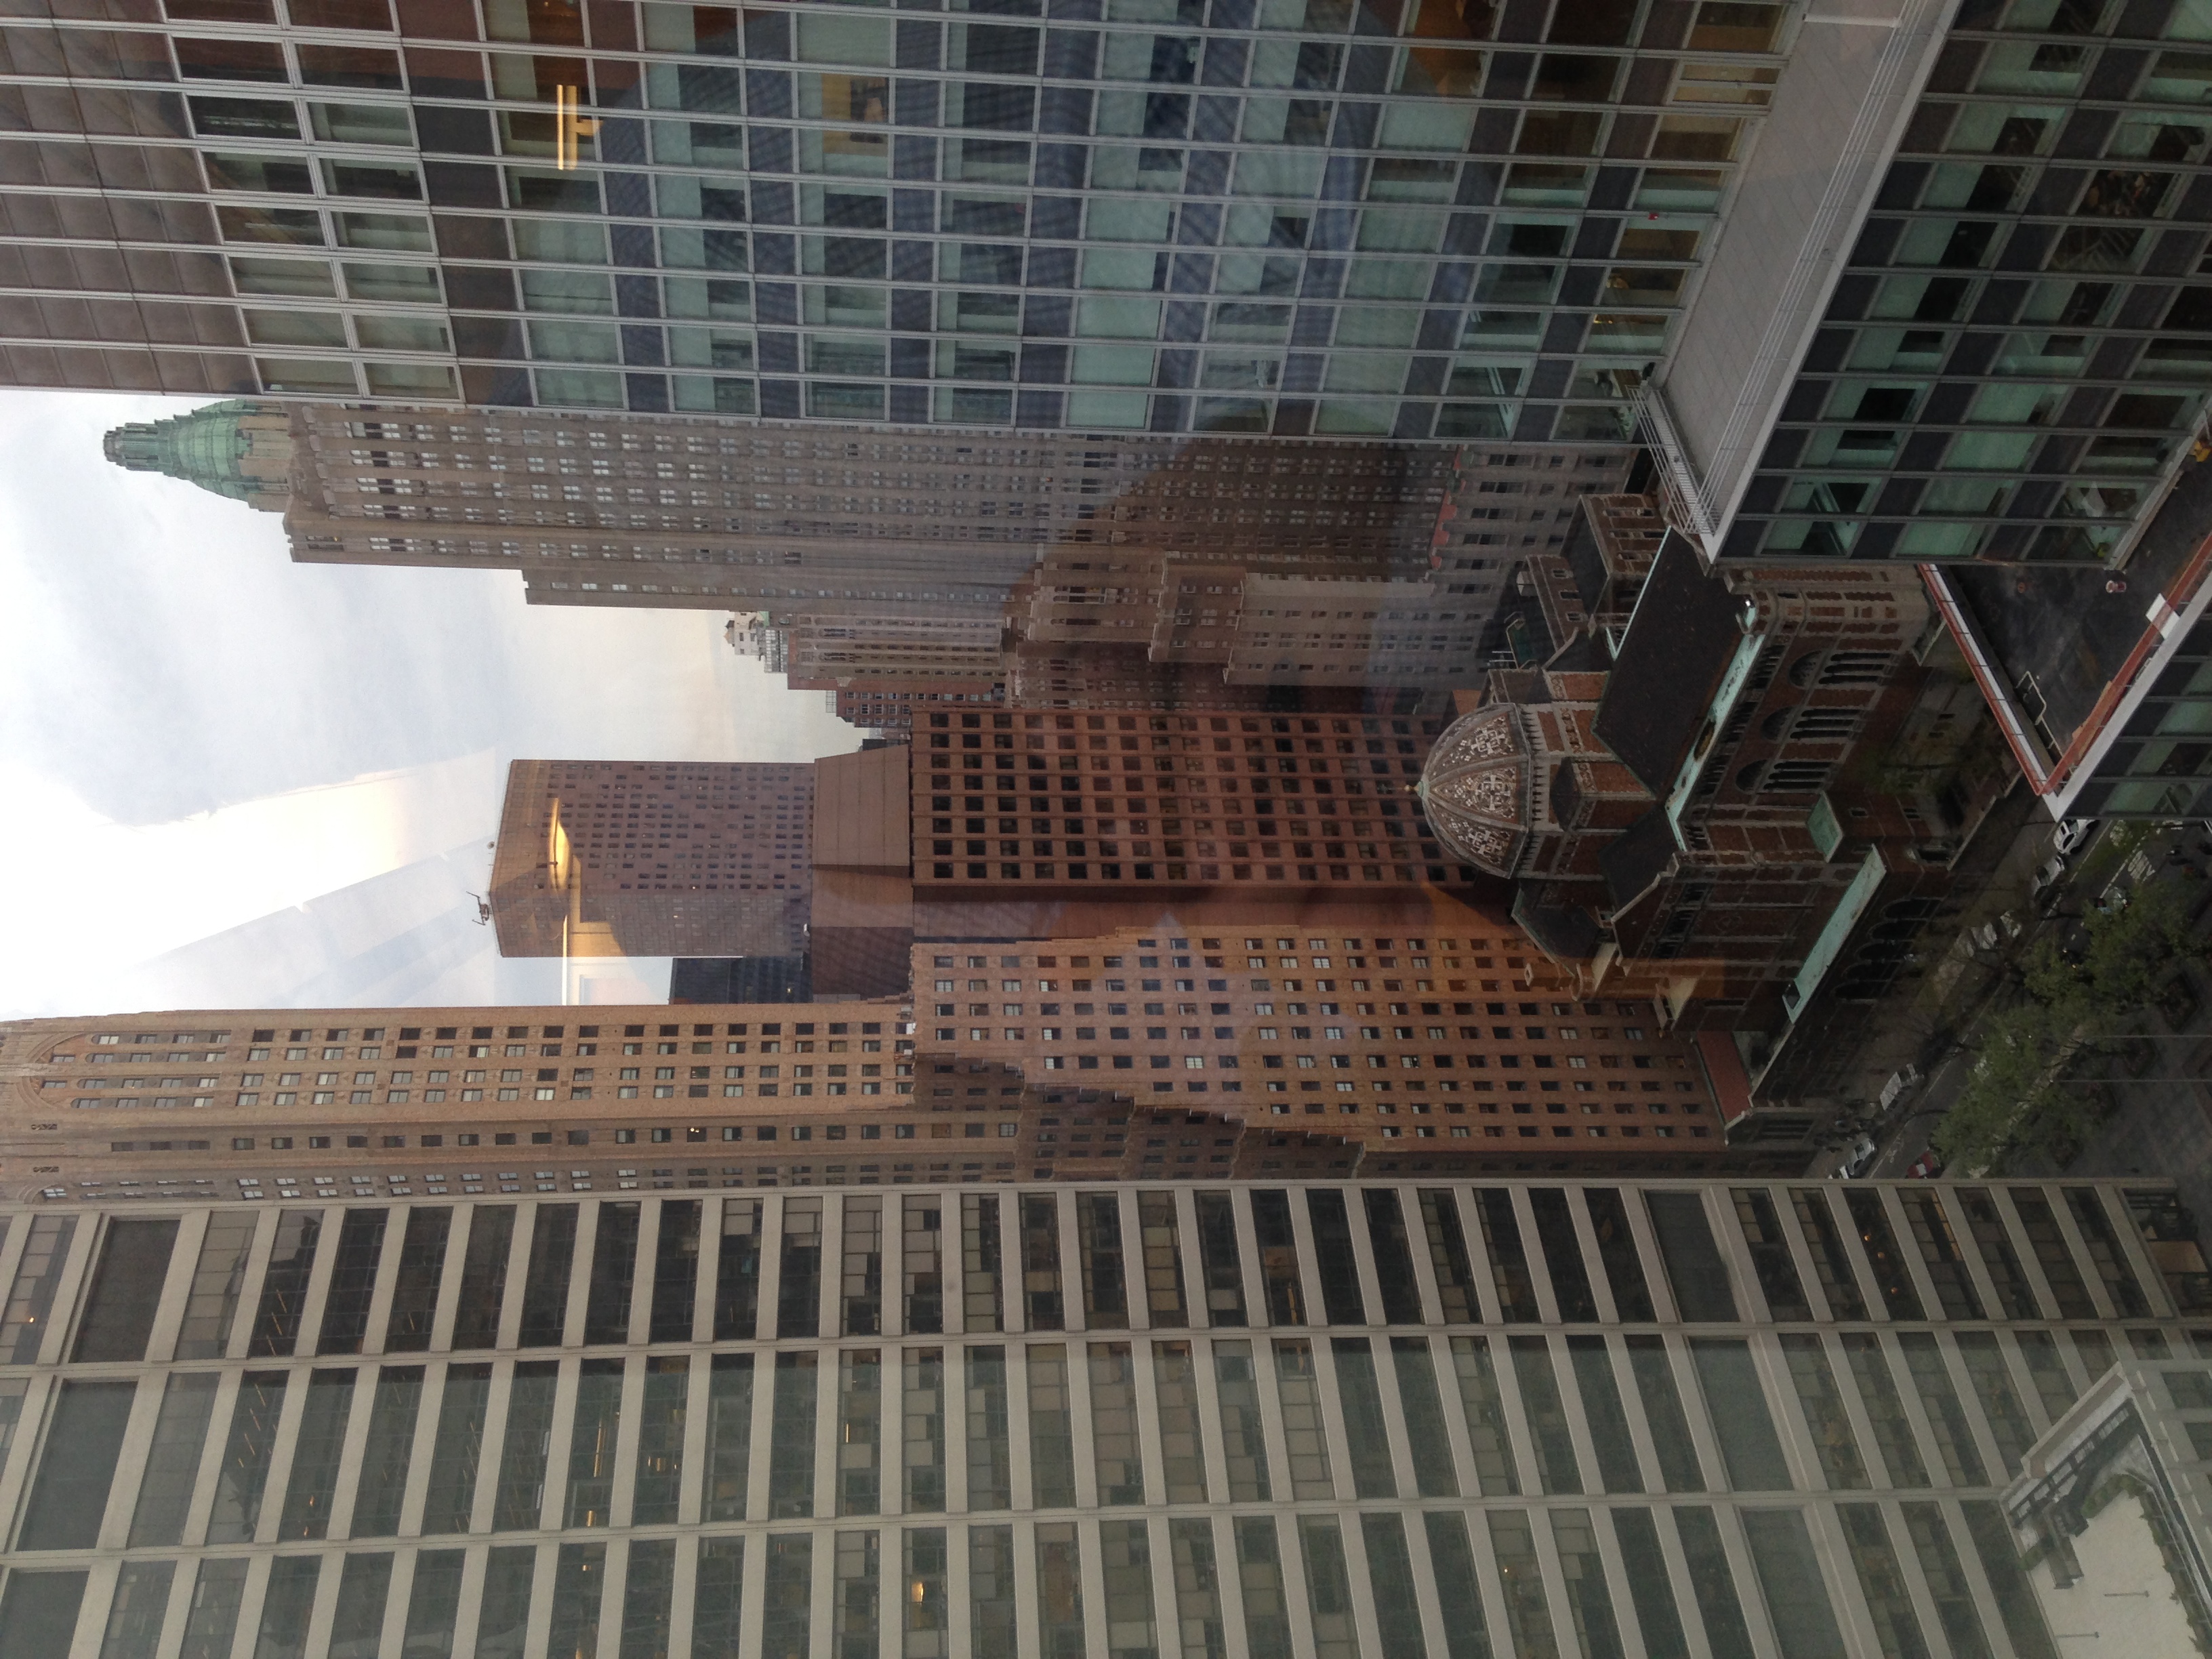 Office View: Park Avenue Plaza Building -- Midtown Manhattan, NYC